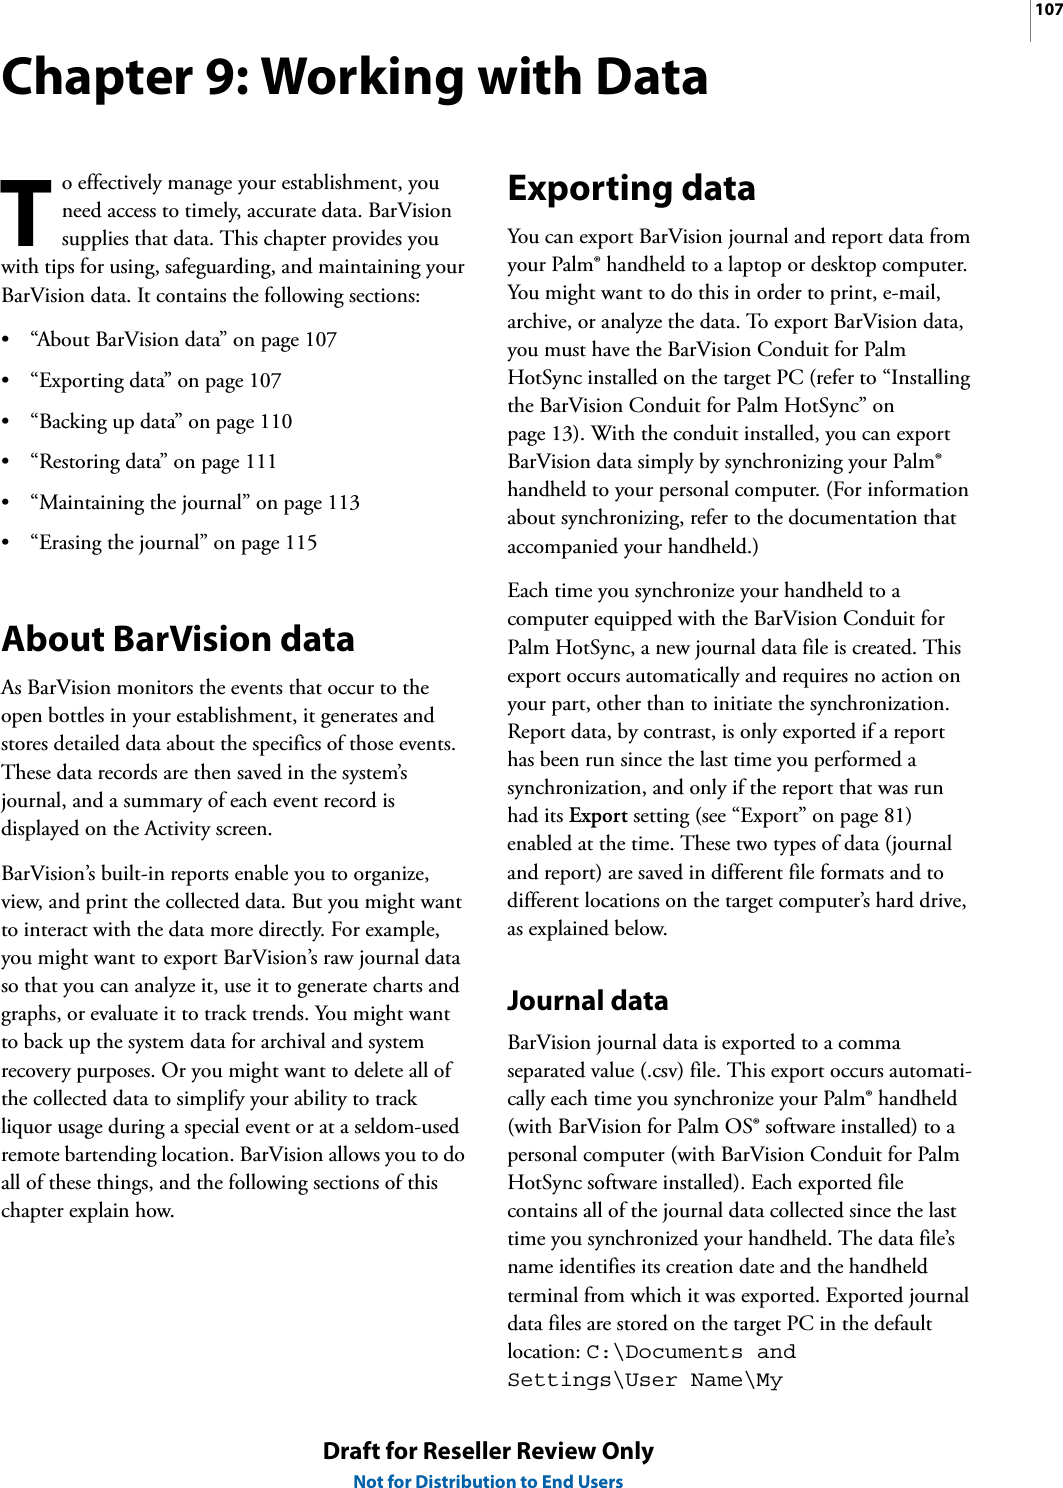 107Draft for Reseller Review OnlyNot for Distribution to End UsersChapter 9: Working with Datao effectively manage your establishment, you need access to timely, accurate data. BarVision supplies that data. This chapter provides you with tips for using, safeguarding, and maintaining your BarVision data. It contains the following sections:• “About BarVision data” on page 107• “Exporting data” on page 107• “Backing up data” on page 110• “Restoring data” on page 111• “Maintaining the journal” on page 113• “Erasing the journal” on page 115About BarVision dataAs BarVision monitors the events that occur to the open bottles in your establishment, it generates and stores detailed data about the specifics of those events. These data records are then saved in the system’s journal, and a summary of each event record is displayed on the Activity screen.BarVision’s built-in reports enable you to organize, view, and print the collected data. But you might want to interact with the data more directly. For example, you might want to export BarVision’s raw journal data so that you can analyze it, use it to generate charts and graphs, or evaluate it to track trends. You might want to back up the system data for archival and system recovery purposes. Or you might want to delete all of the collected data to simplify your ability to track liquor usage during a special event or at a seldom-used remote bartending location. BarVision allows you to do all of these things, and the following sections of this chapter explain how.Exporting dataYou can export BarVision journal and report data from your Palm® handheld to a laptop or desktop computer. You might want to do this in order to print, e-mail, archive, or analyze the data. To export BarVision data, you must have the BarVision Conduit for Palm HotSync installed on the target PC (refer to “Installing the BarVision Conduit for Palm HotSync” on page 13). With the conduit installed, you can export BarVision data simply by synchronizing your Palm® handheld to your personal computer. (For information about synchronizing, refer to the documentation that accompanied your handheld.)Each time you synchronize your handheld to a computer equipped with the BarVision Conduit for Palm HotSync, a new journal data file is created. This export occurs automatically and requires no action on your part, other than to initiate the synchronization. Report data, by contrast, is only exported if a report has been run since the last time you performed a synchronization, and only if the report that was run had its Export setting (see “Export” on page 81) enabled at the time. These two types of data (journal and report) are saved in different file formats and to different locations on the target computer’s hard drive, as explained below.Journal dataBarVision journal data is exported to a comma separated value (.csv) file. This export occurs automati-cally each time you synchronize your Palm® handheld (with BarVision for Palm OS® software installed) to a personal computer (with BarVision Conduit for Palm HotSync software installed). Each exported file contains all of the journal data collected since the last time you synchronized your handheld. The data file’s name identifies its creation date and the handheld terminal from which it was exported. Exported journal data files are stored on the target PC in the default location: C:\Documents and Settings\User Name\My T